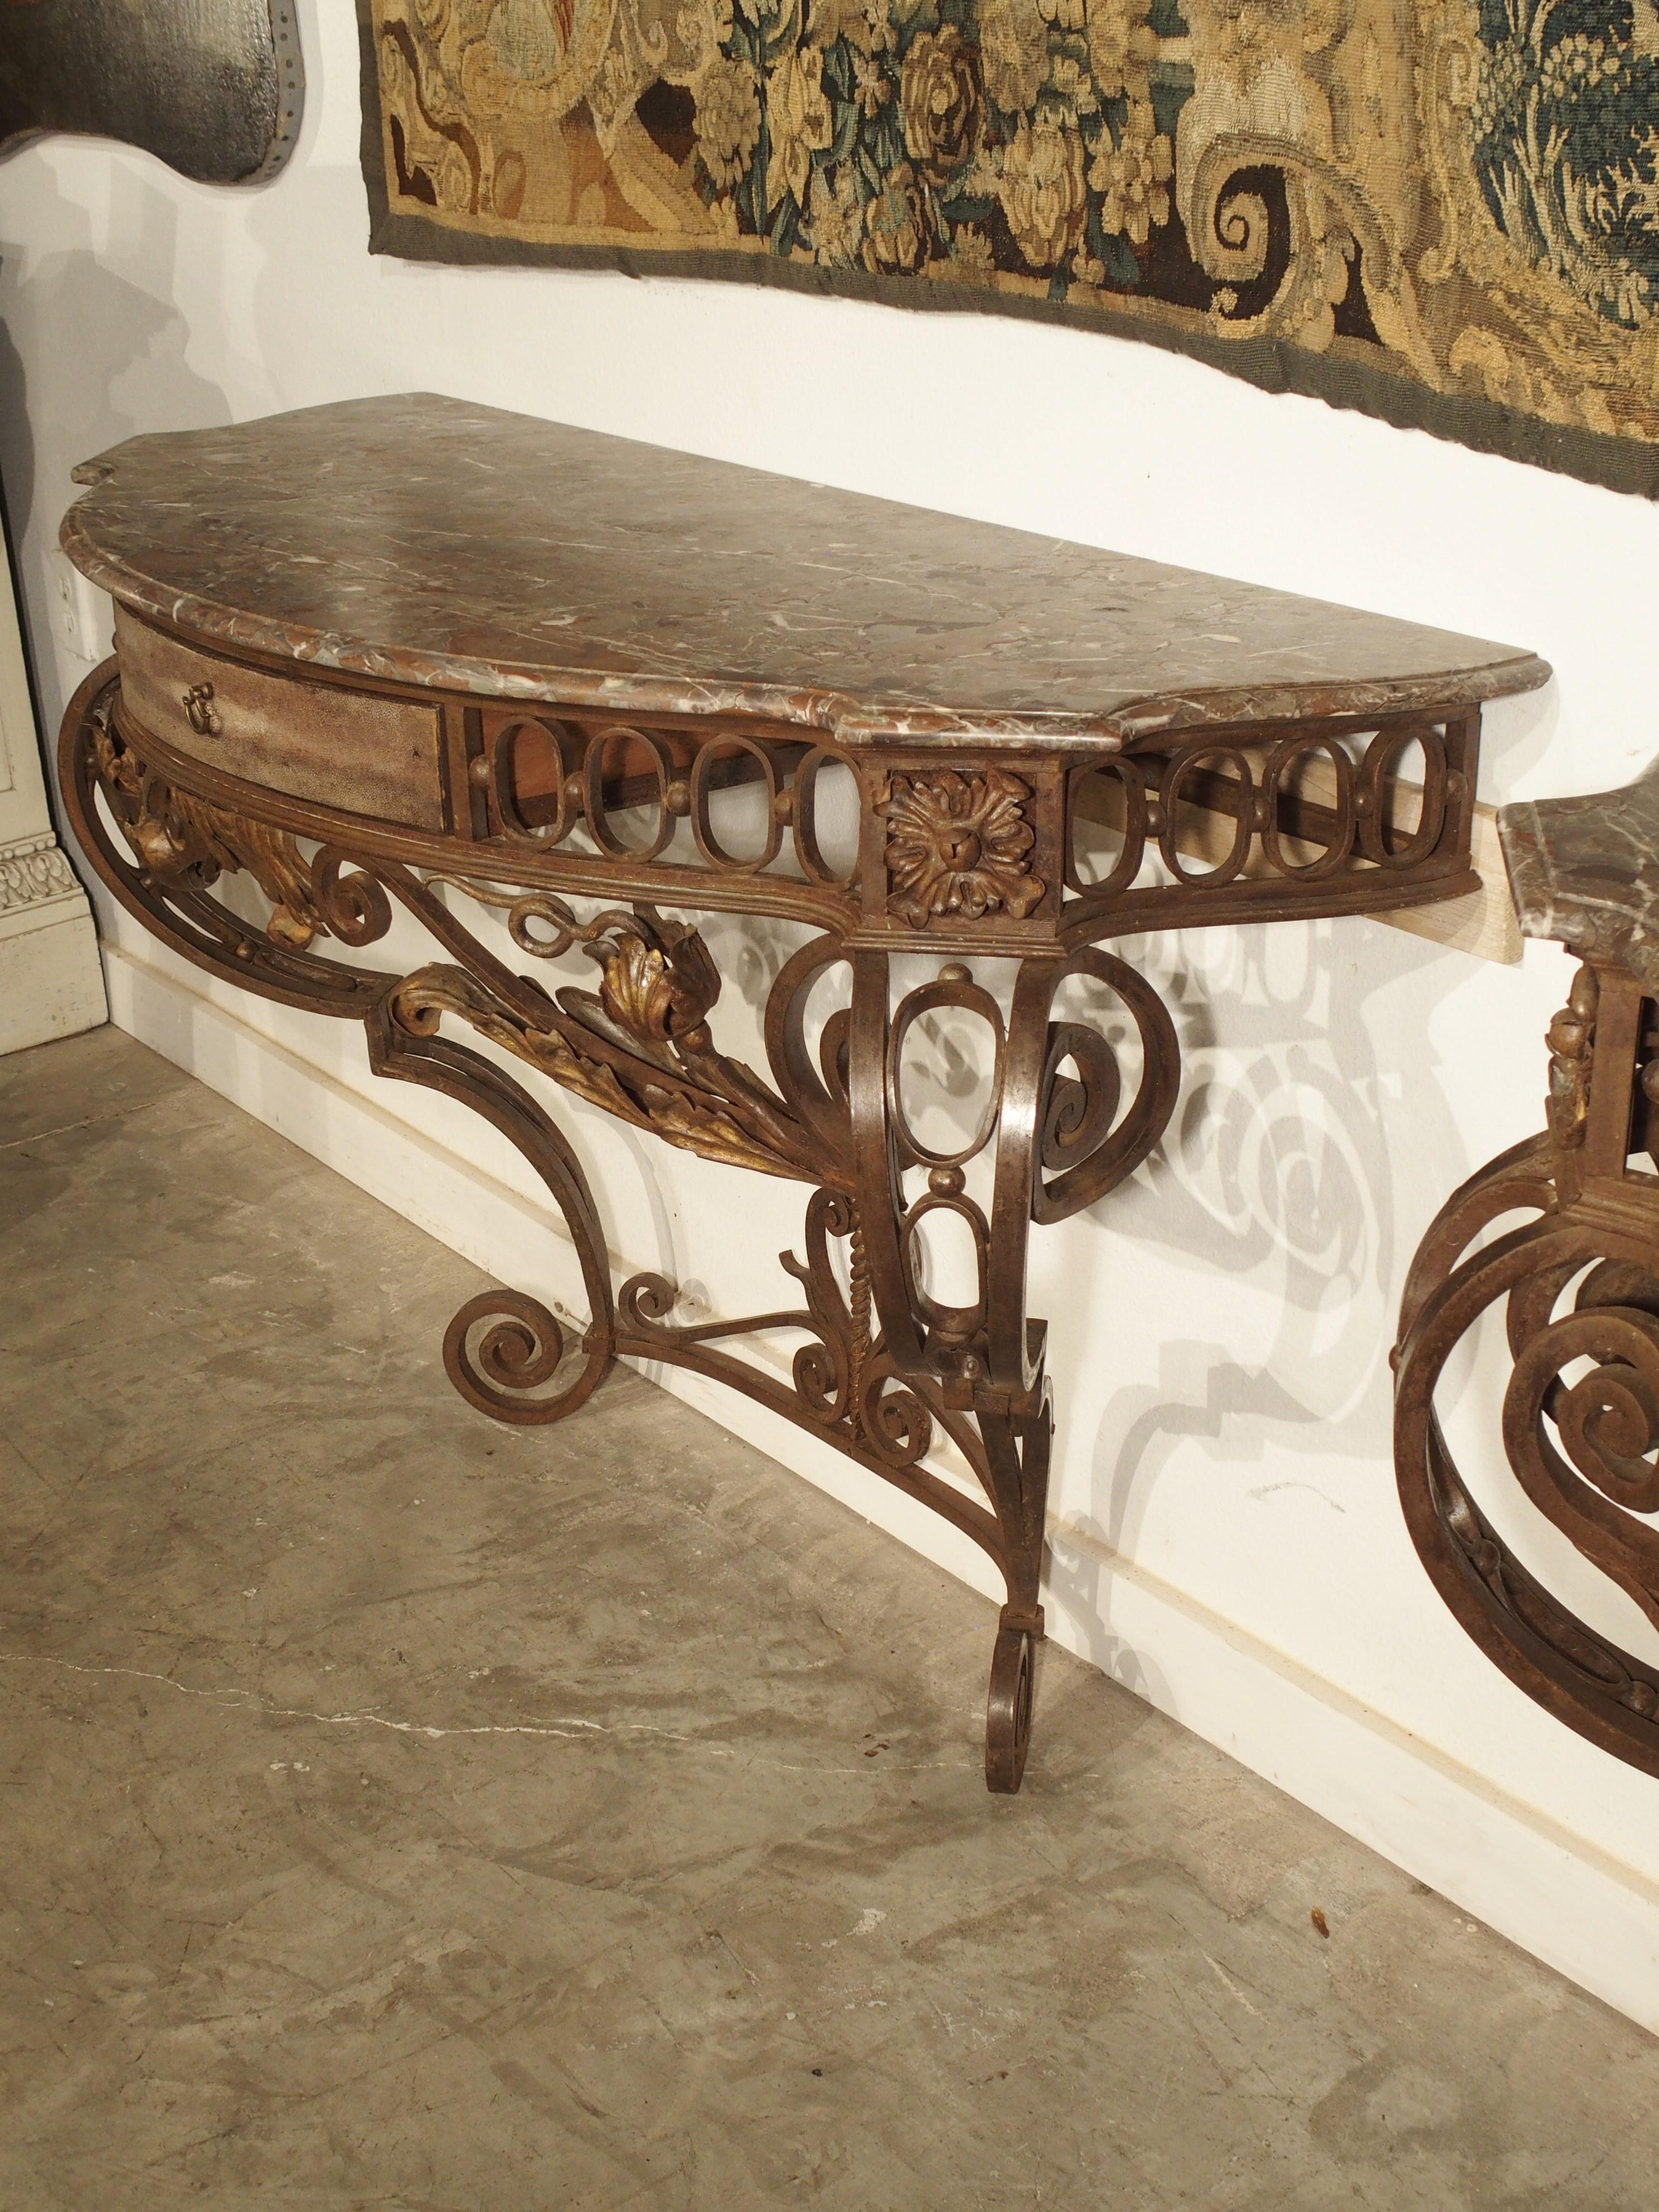 From France, circa 1880, this rare pair of wrought iron consoles have marble tops and shagreen covered wooden drawers.

The marble tops are original to the consoles and feature a “bec de corbin” molded edge. The marble is a Belgian “Rouge Royal”;